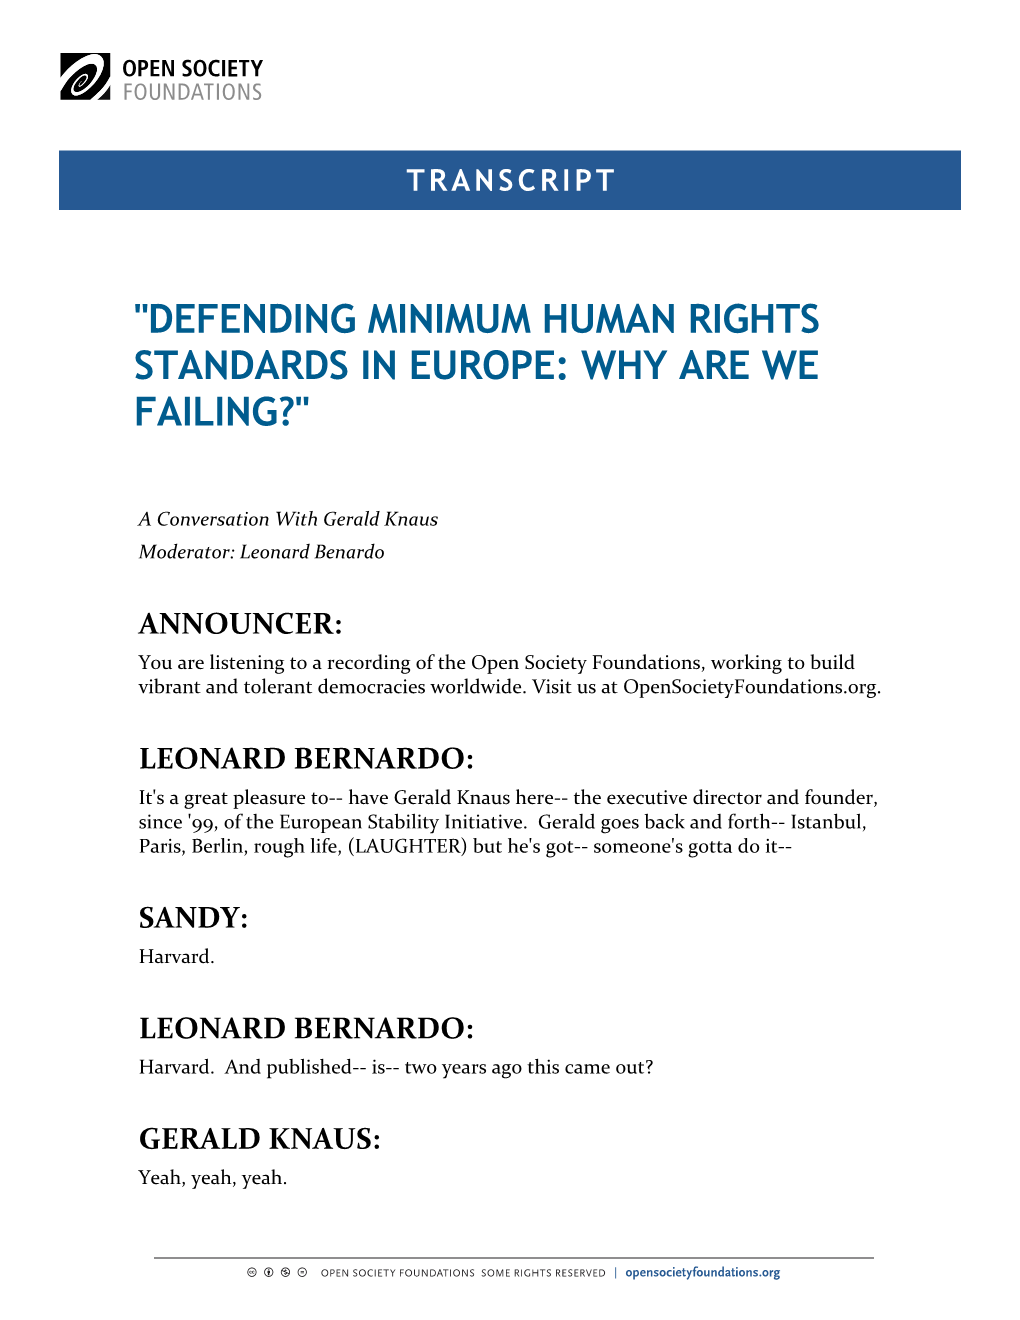 "Defending Minimum Human Rights Standards in Europe: Why Are We Failing?"